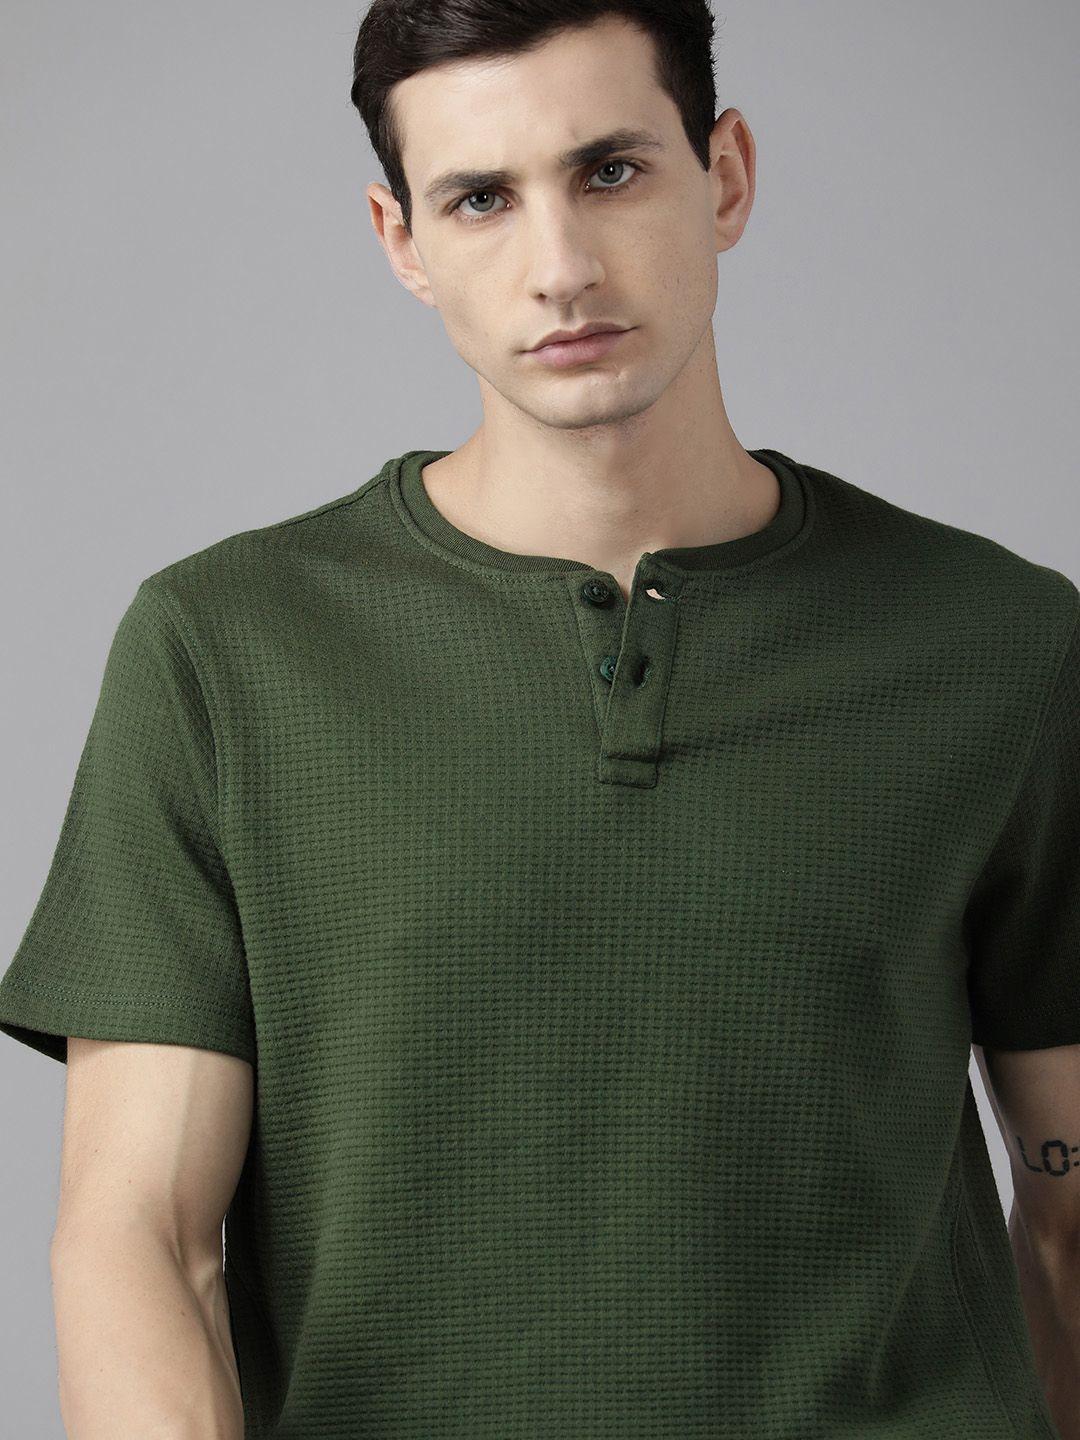 The Roadster Lifestyle Co. Henley Neck Textured T-shirt